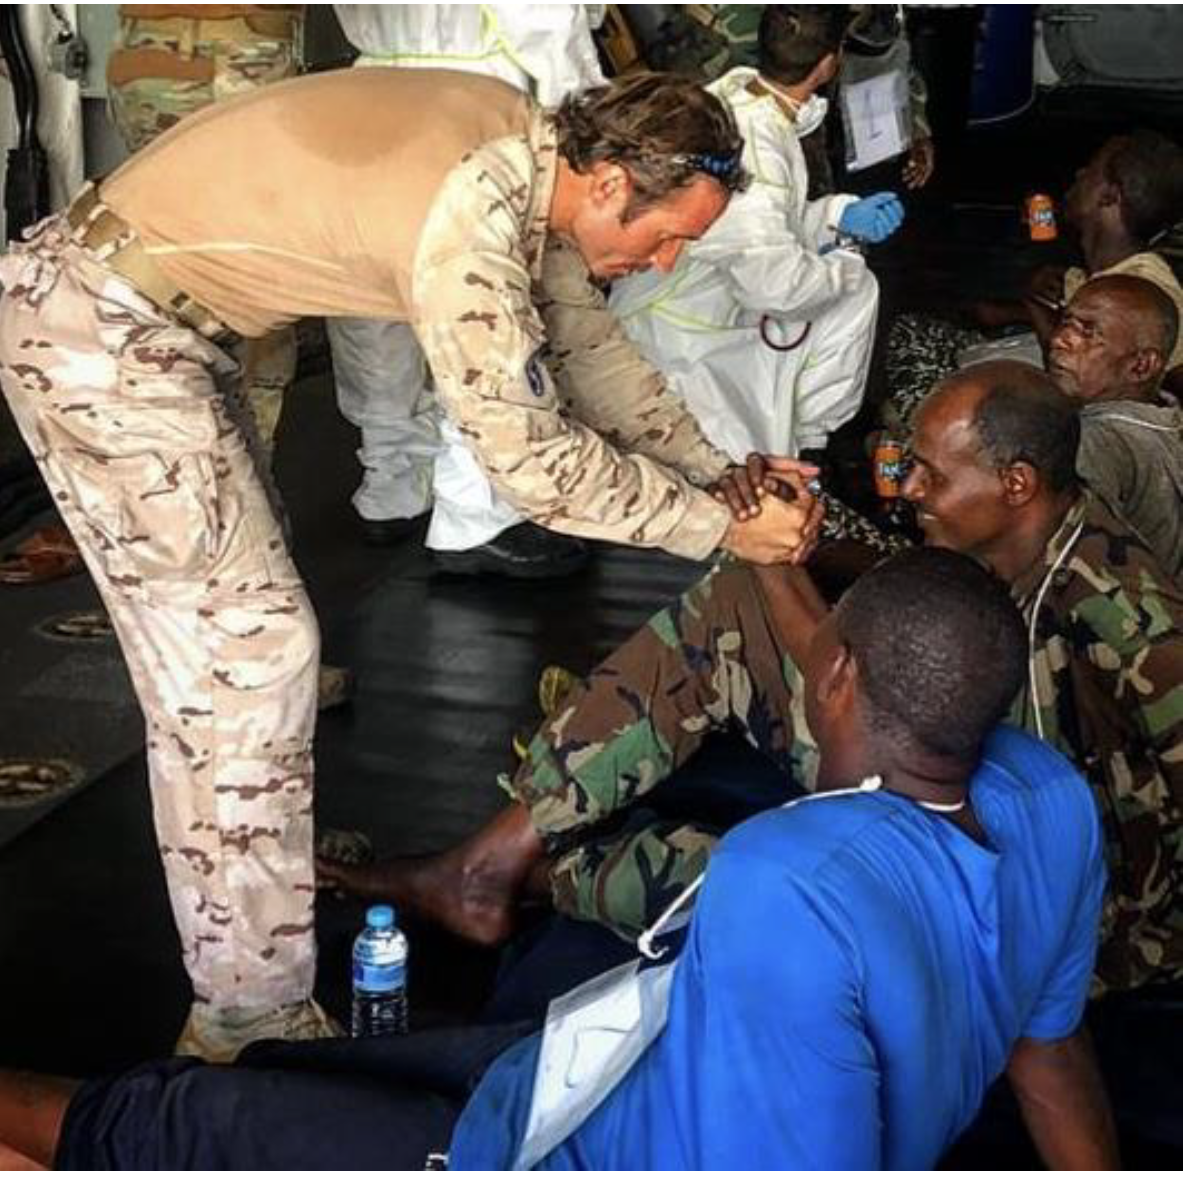 EUNAVFOR provides medical aid to rescued sailors. Photo: EUNAVFOR